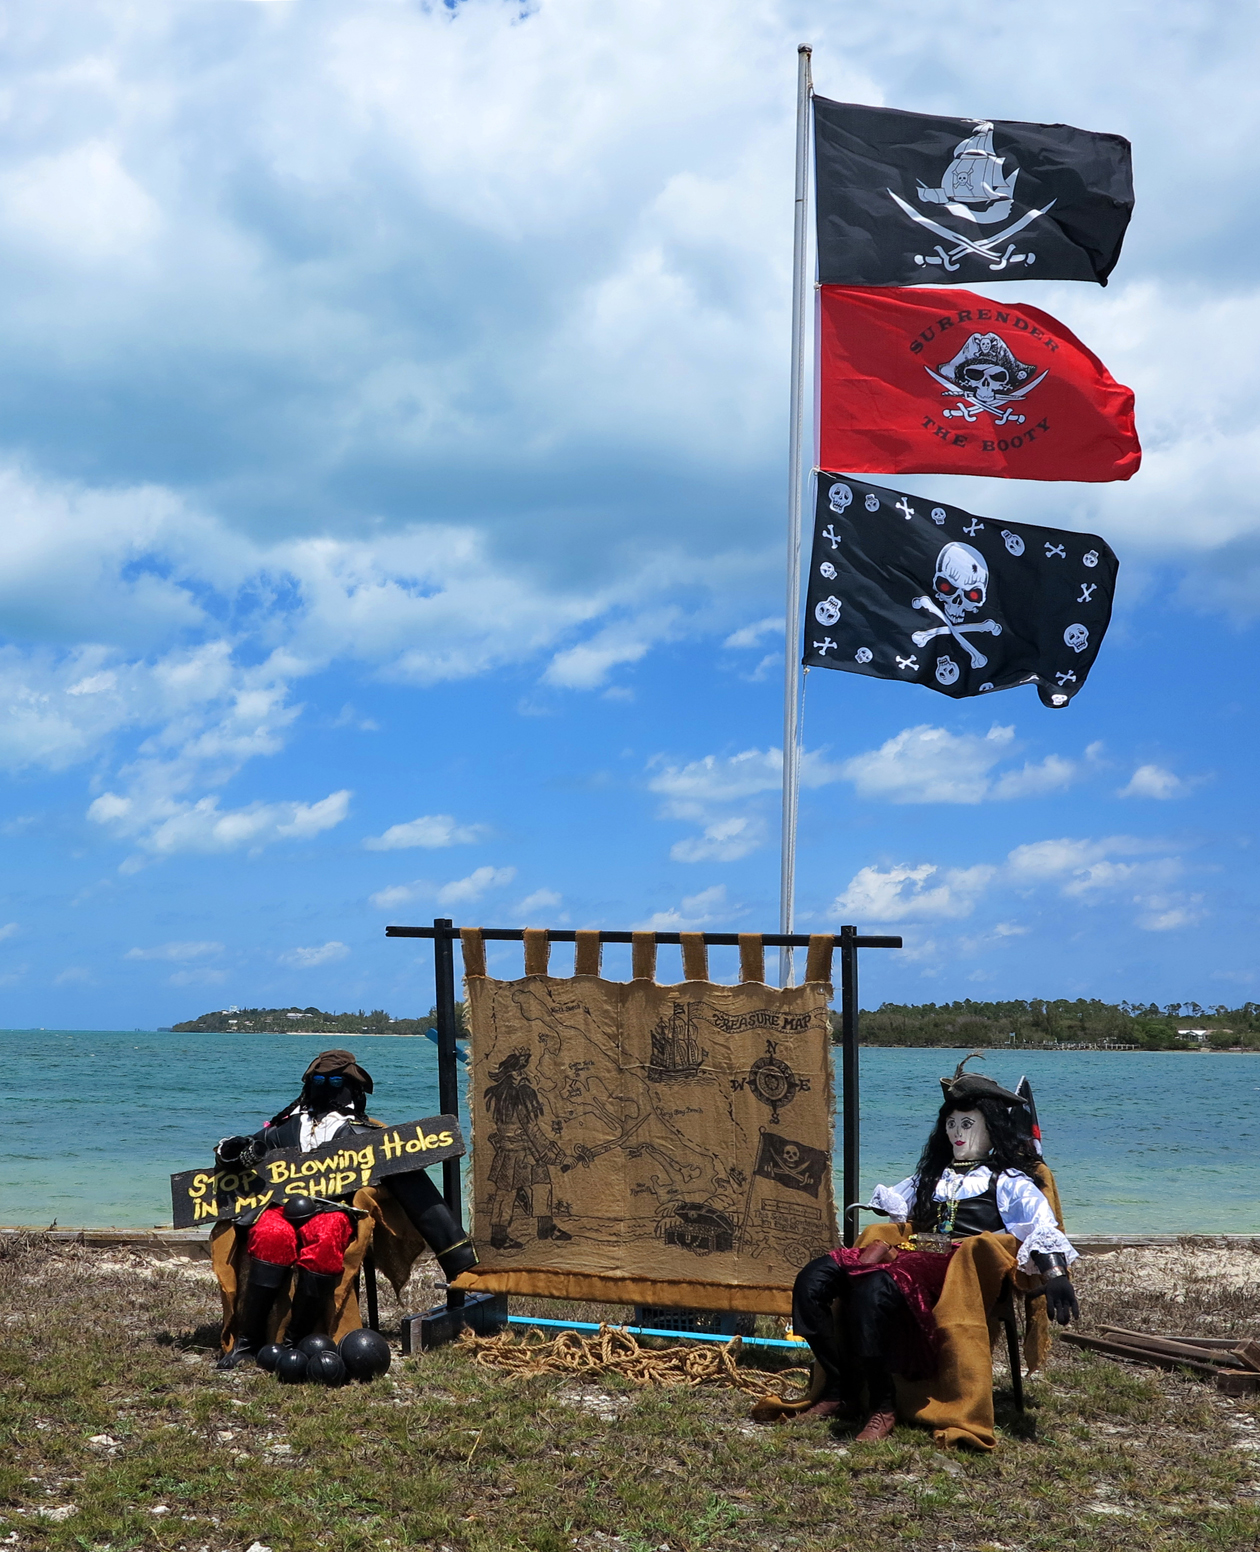 Island Roots Heritage Festival -- May 2016, Green Turtle Cay